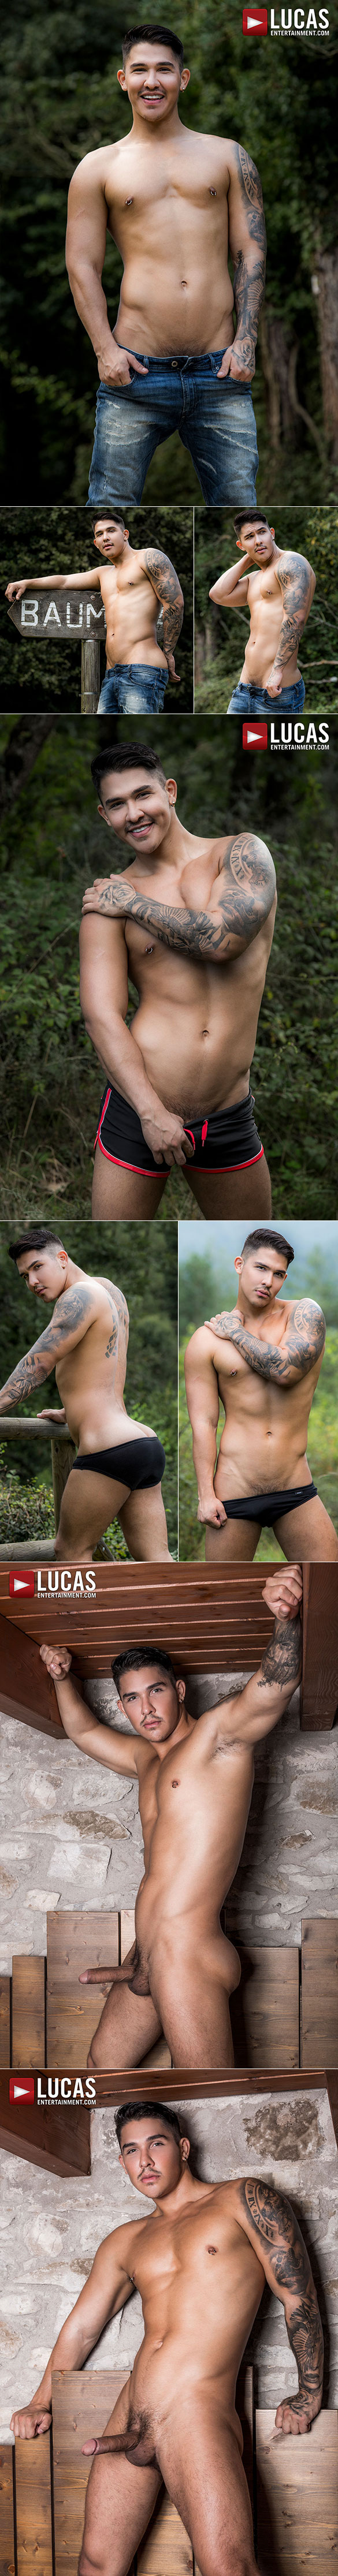 Lucas Entertainment: James Castle, Apolo Fire and Dani Robles' raw threesome in "Uncut in the Great Outdoors"